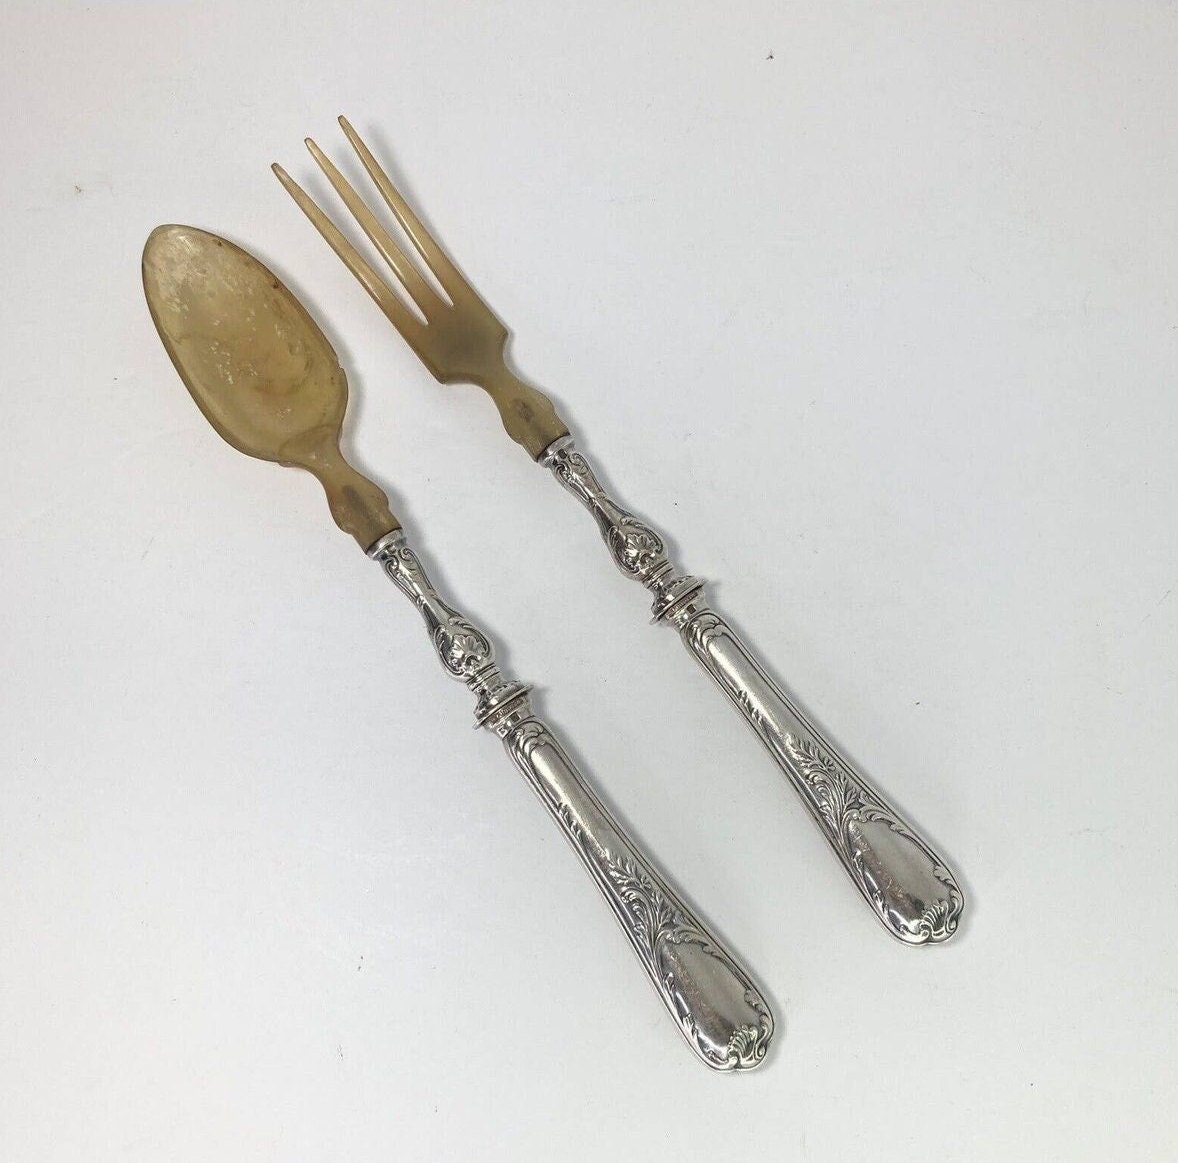 Christofle Silverplate Flatware Set in Marly Pattern 119 Pieces Gorgeous!